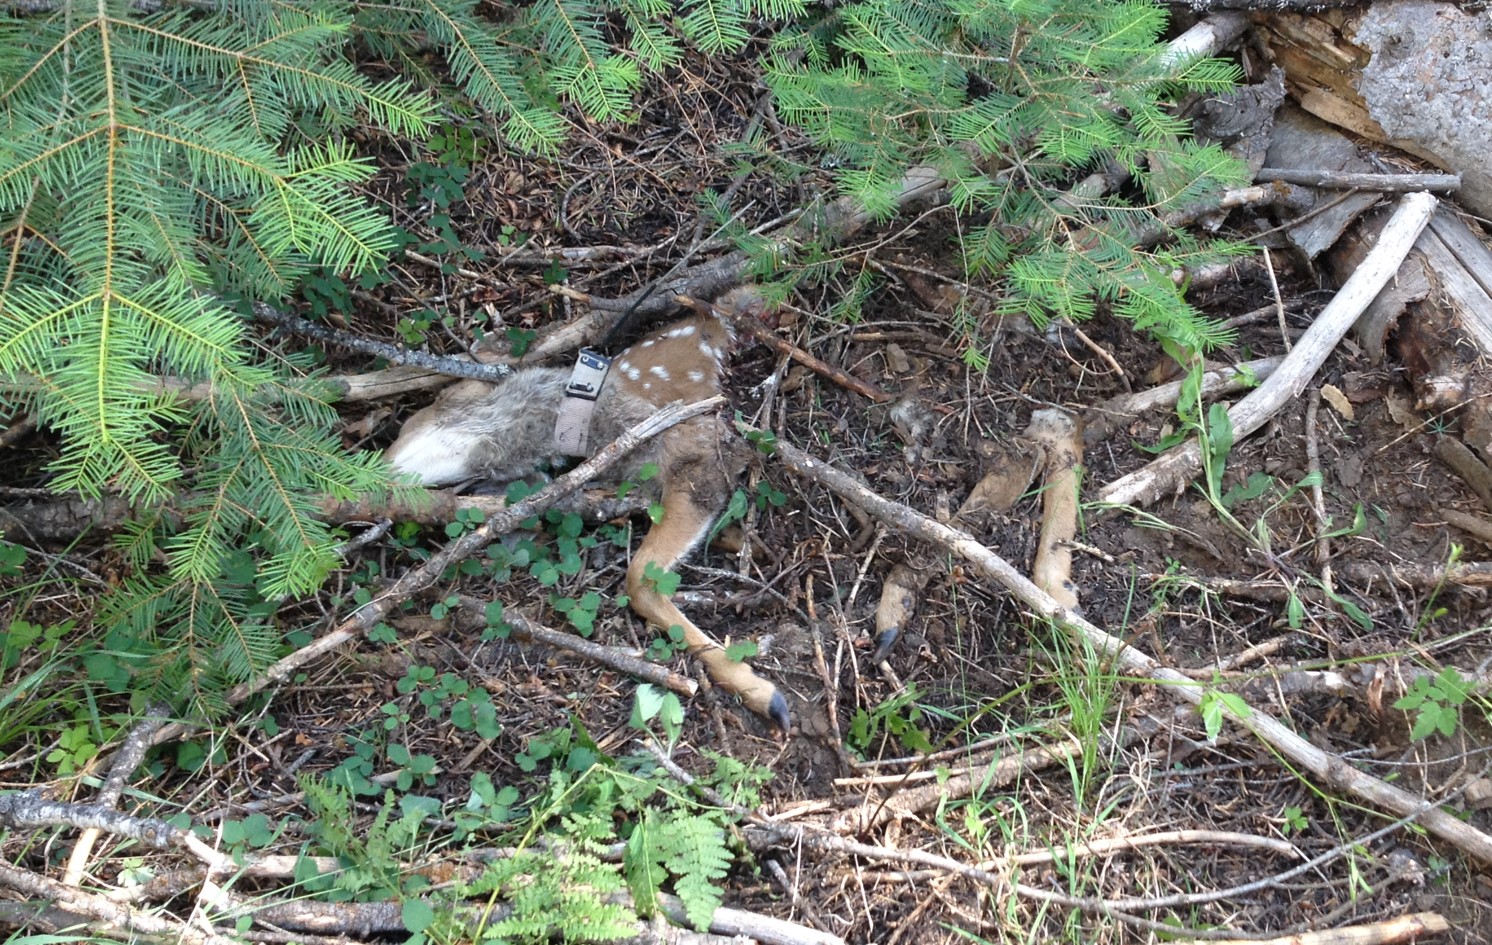 Fawn killed by bobcat